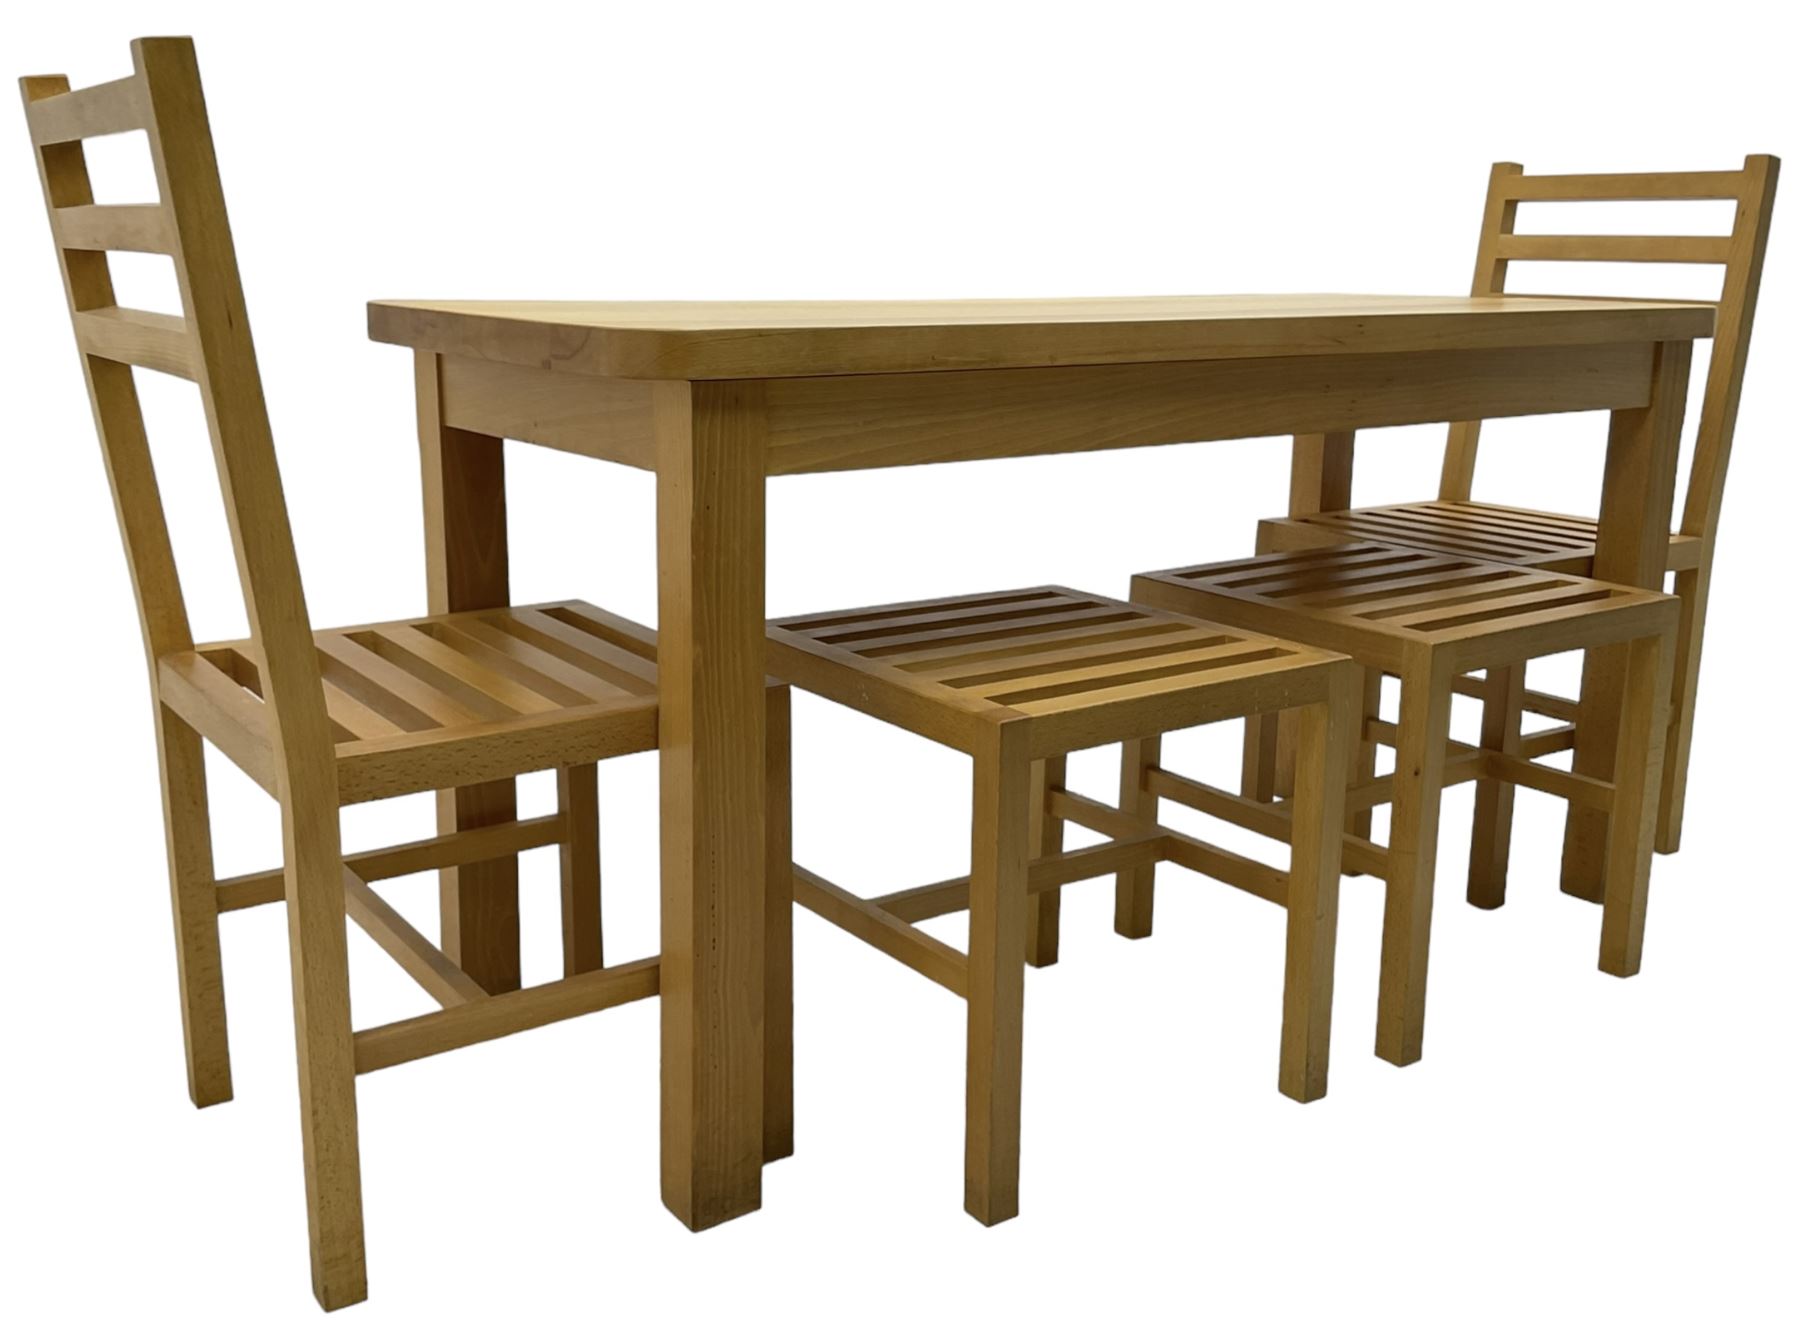 Light beech rectangular dining table; together with two chairs and two stools - Image 5 of 6